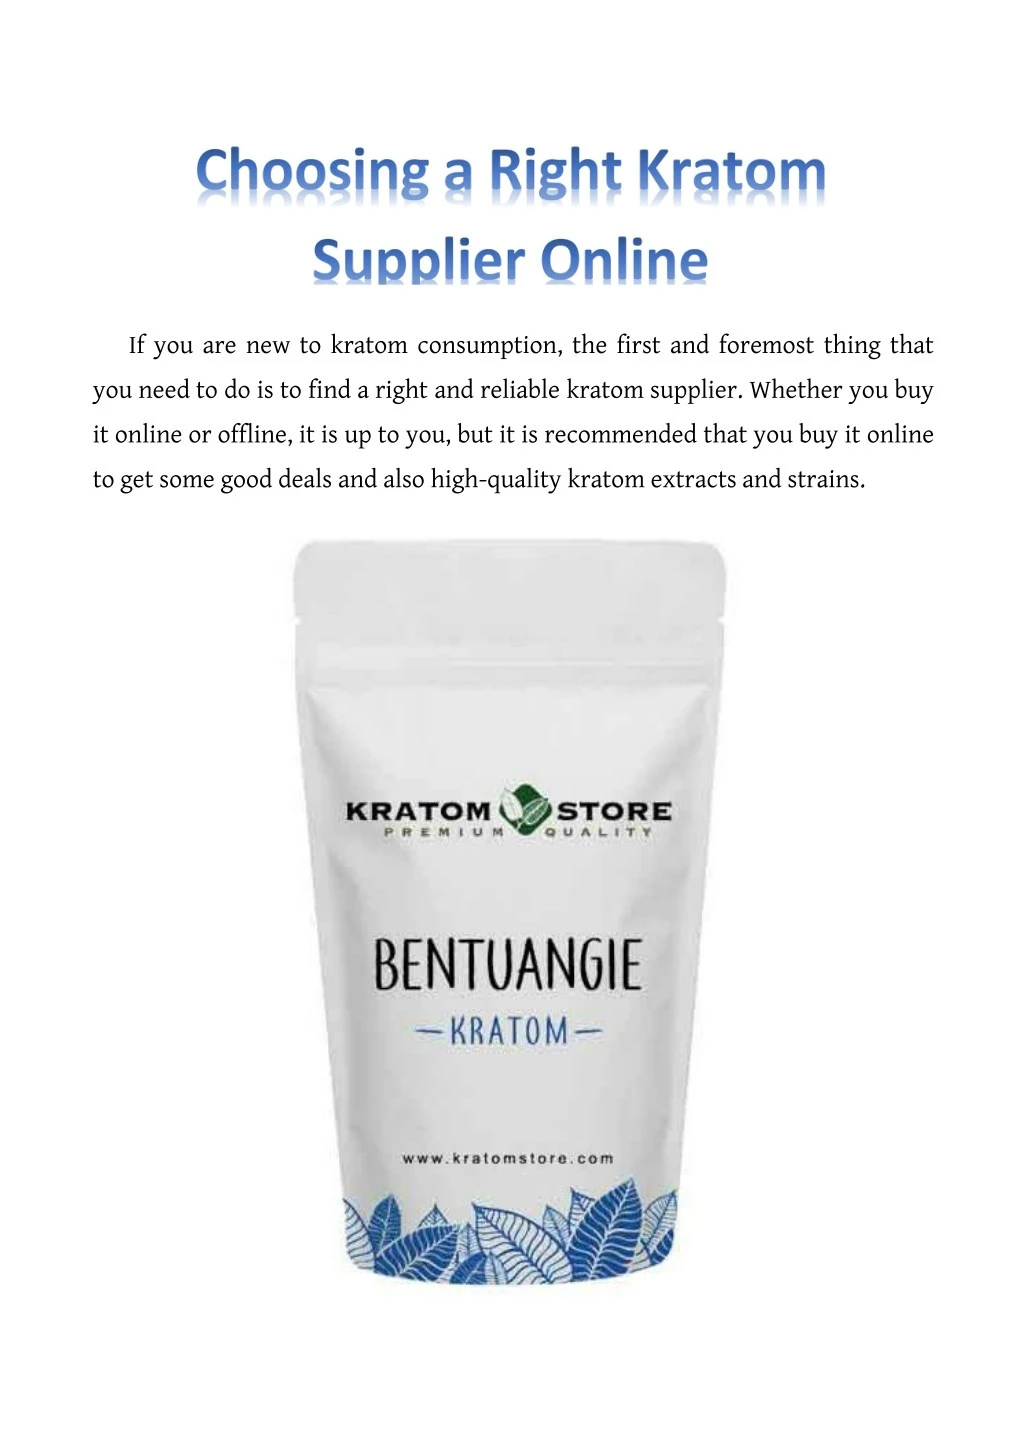 if you are new to kratom consumption the first